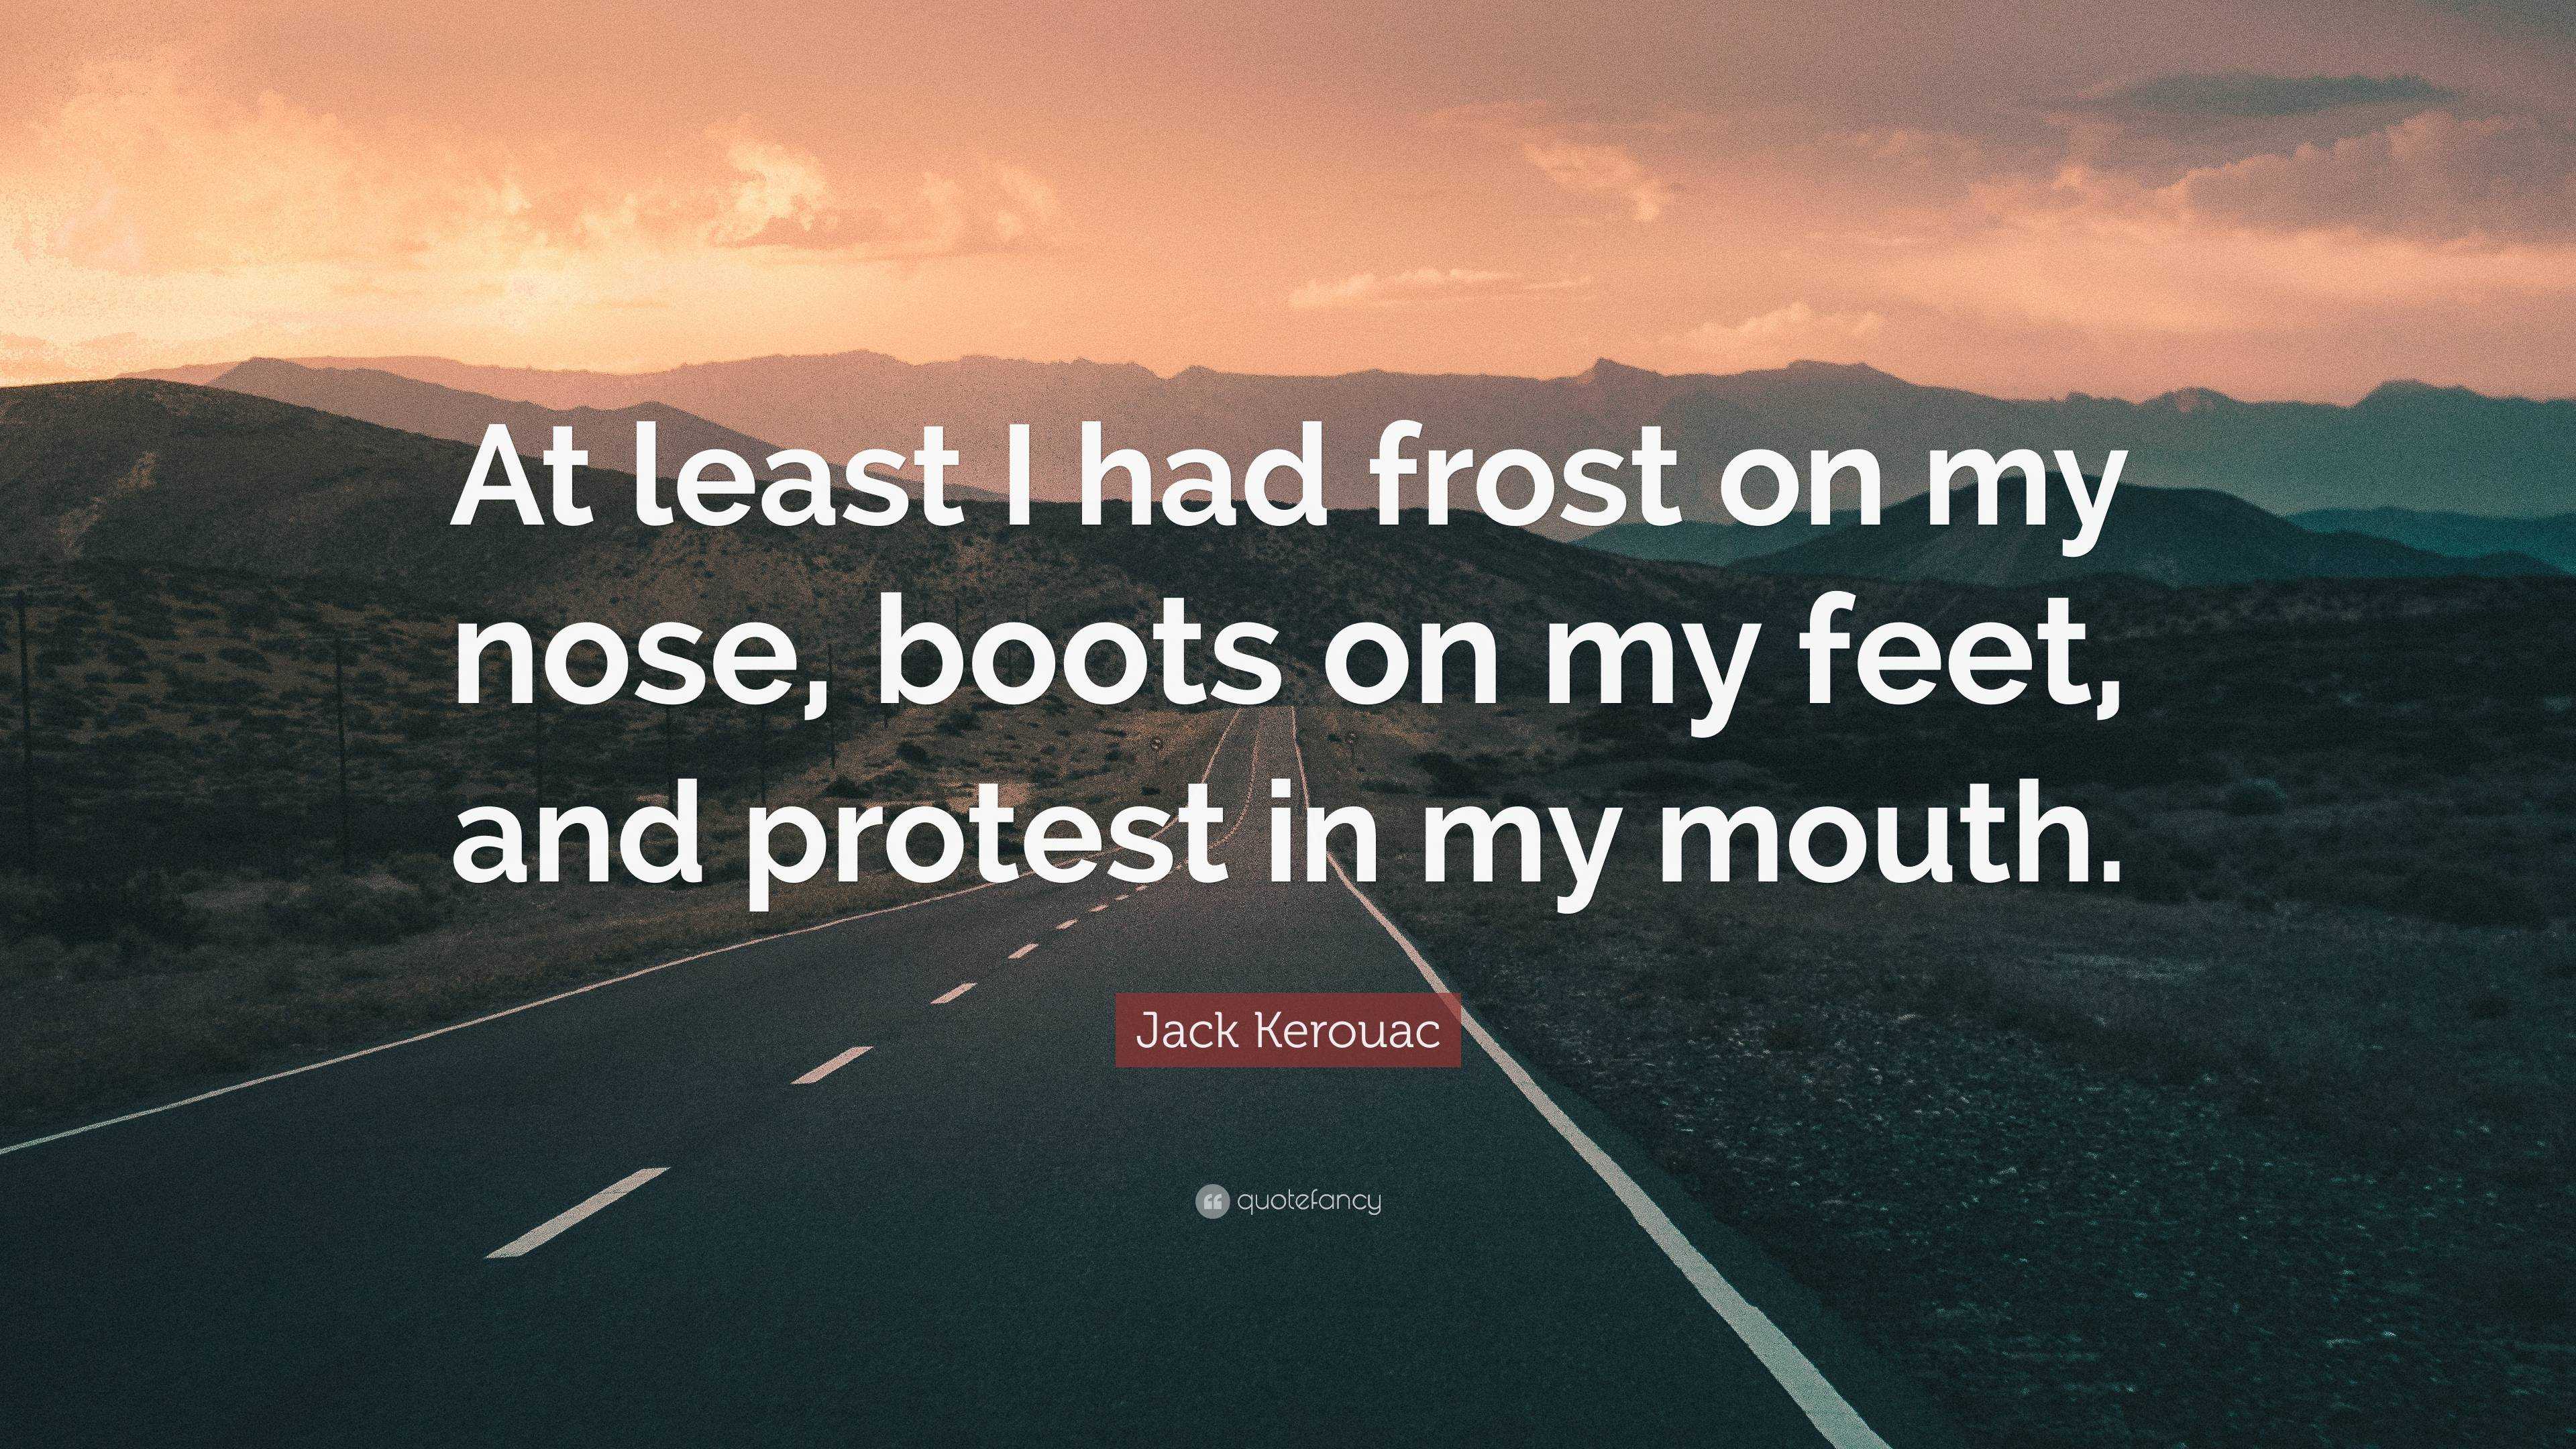 Jack Kerouac Quote “at Least I Had Frost On My Nose Boots On My Feet And Protest In My Mouth ”